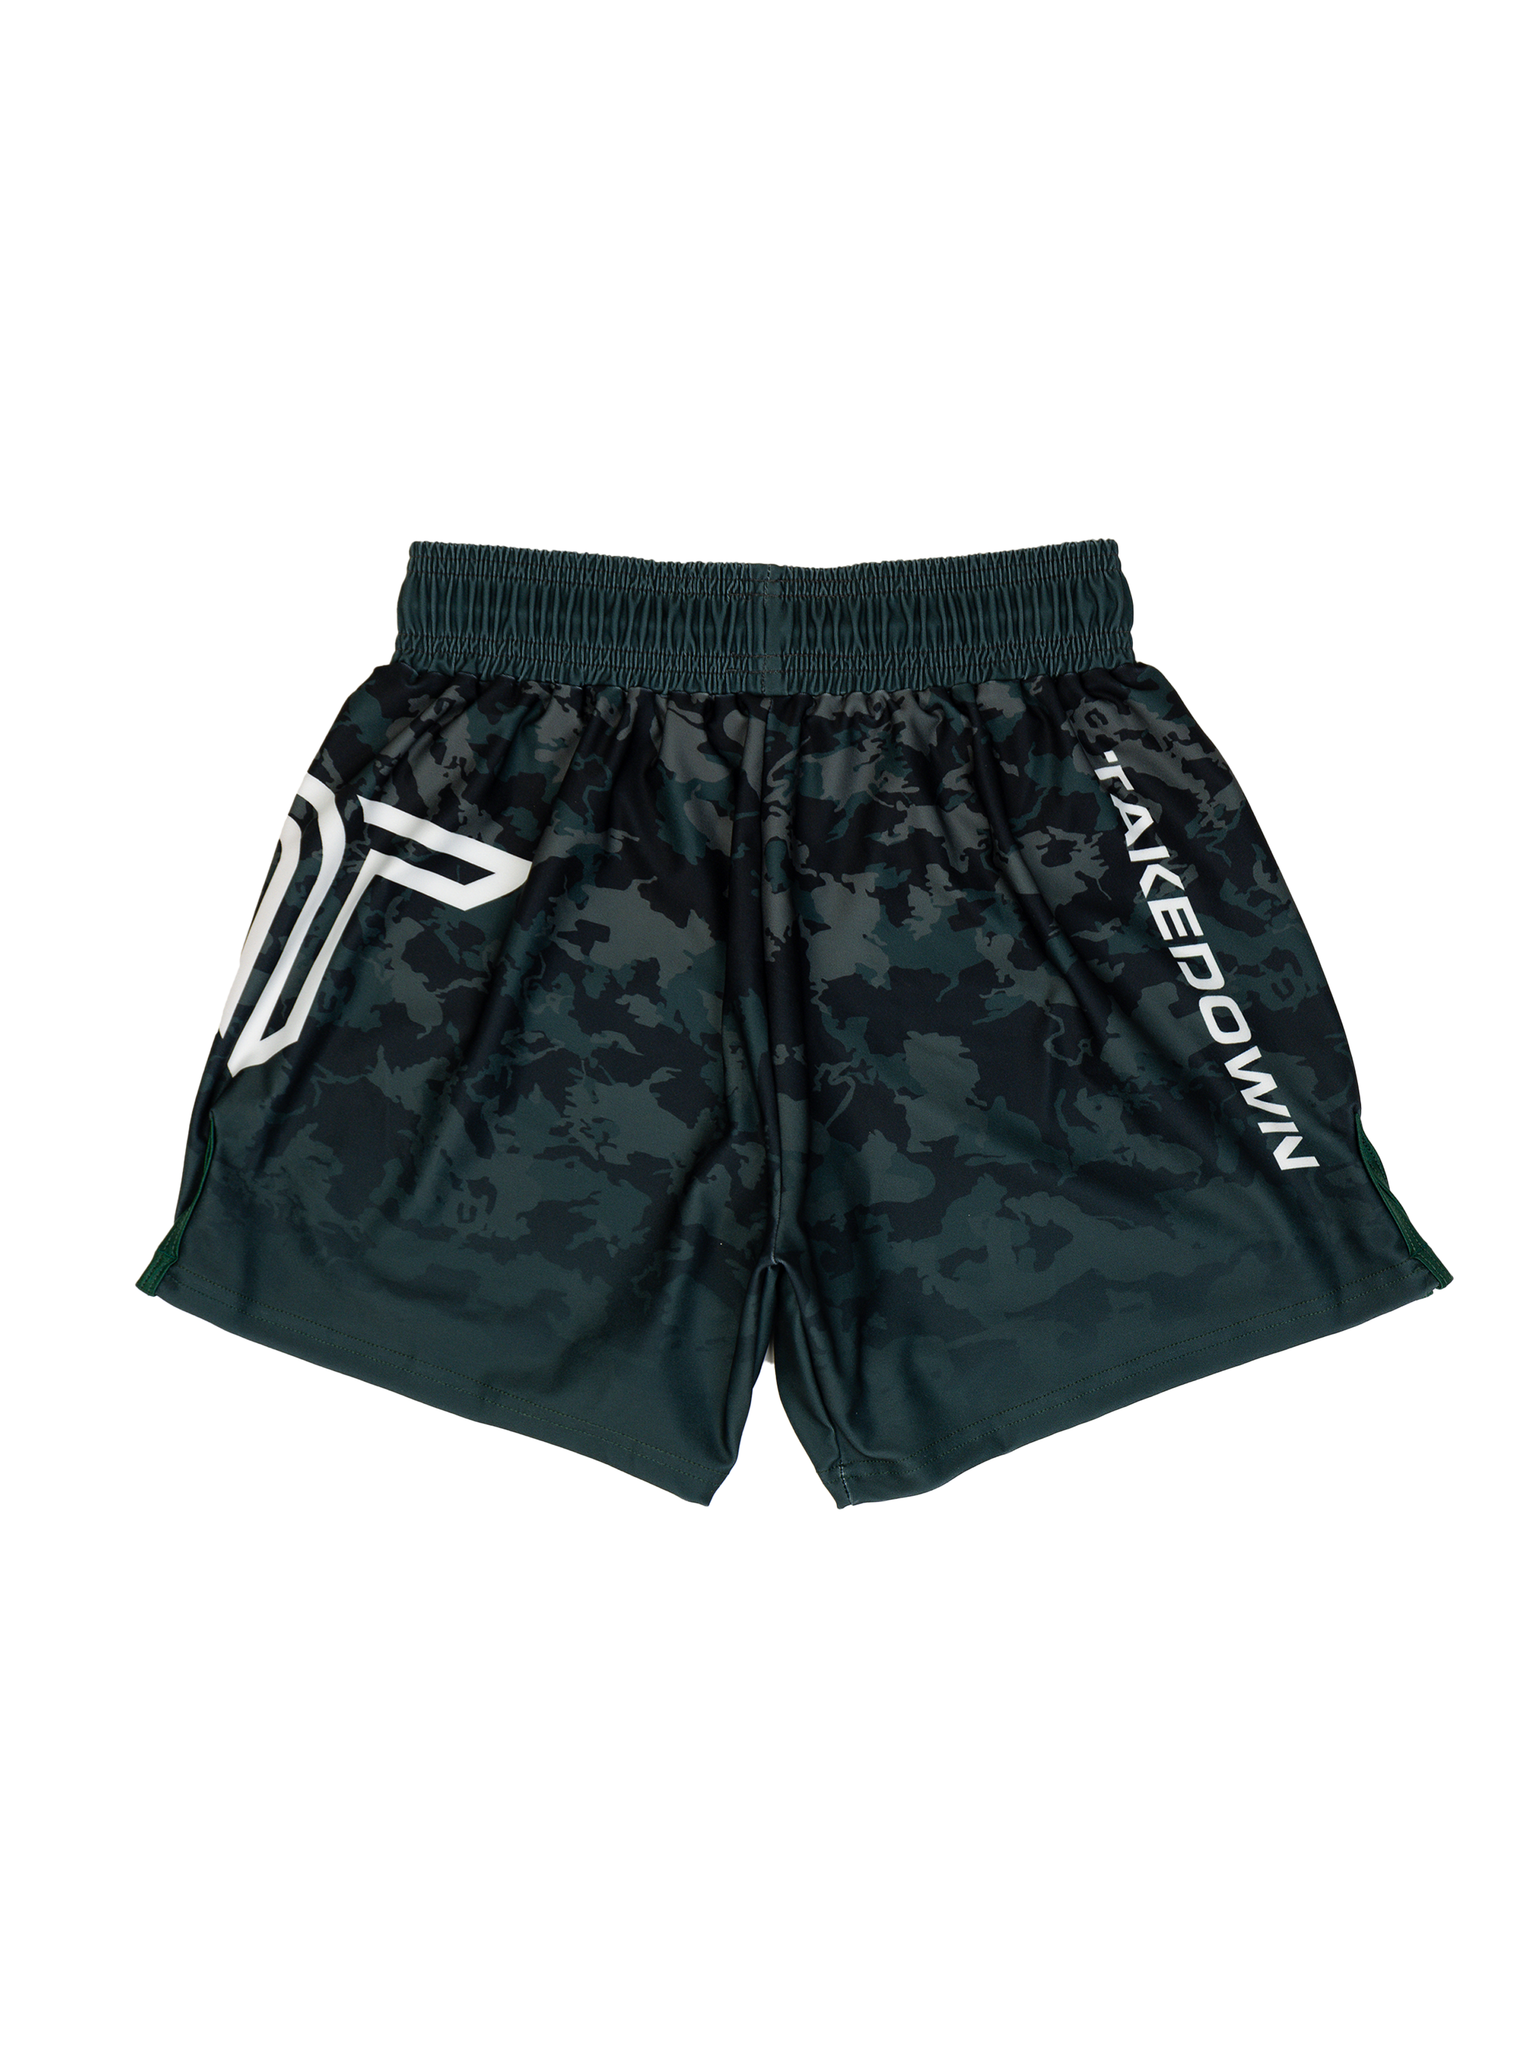 Particle Camo Women's Fight Shorts - Moss (3" & 5" Inseam)